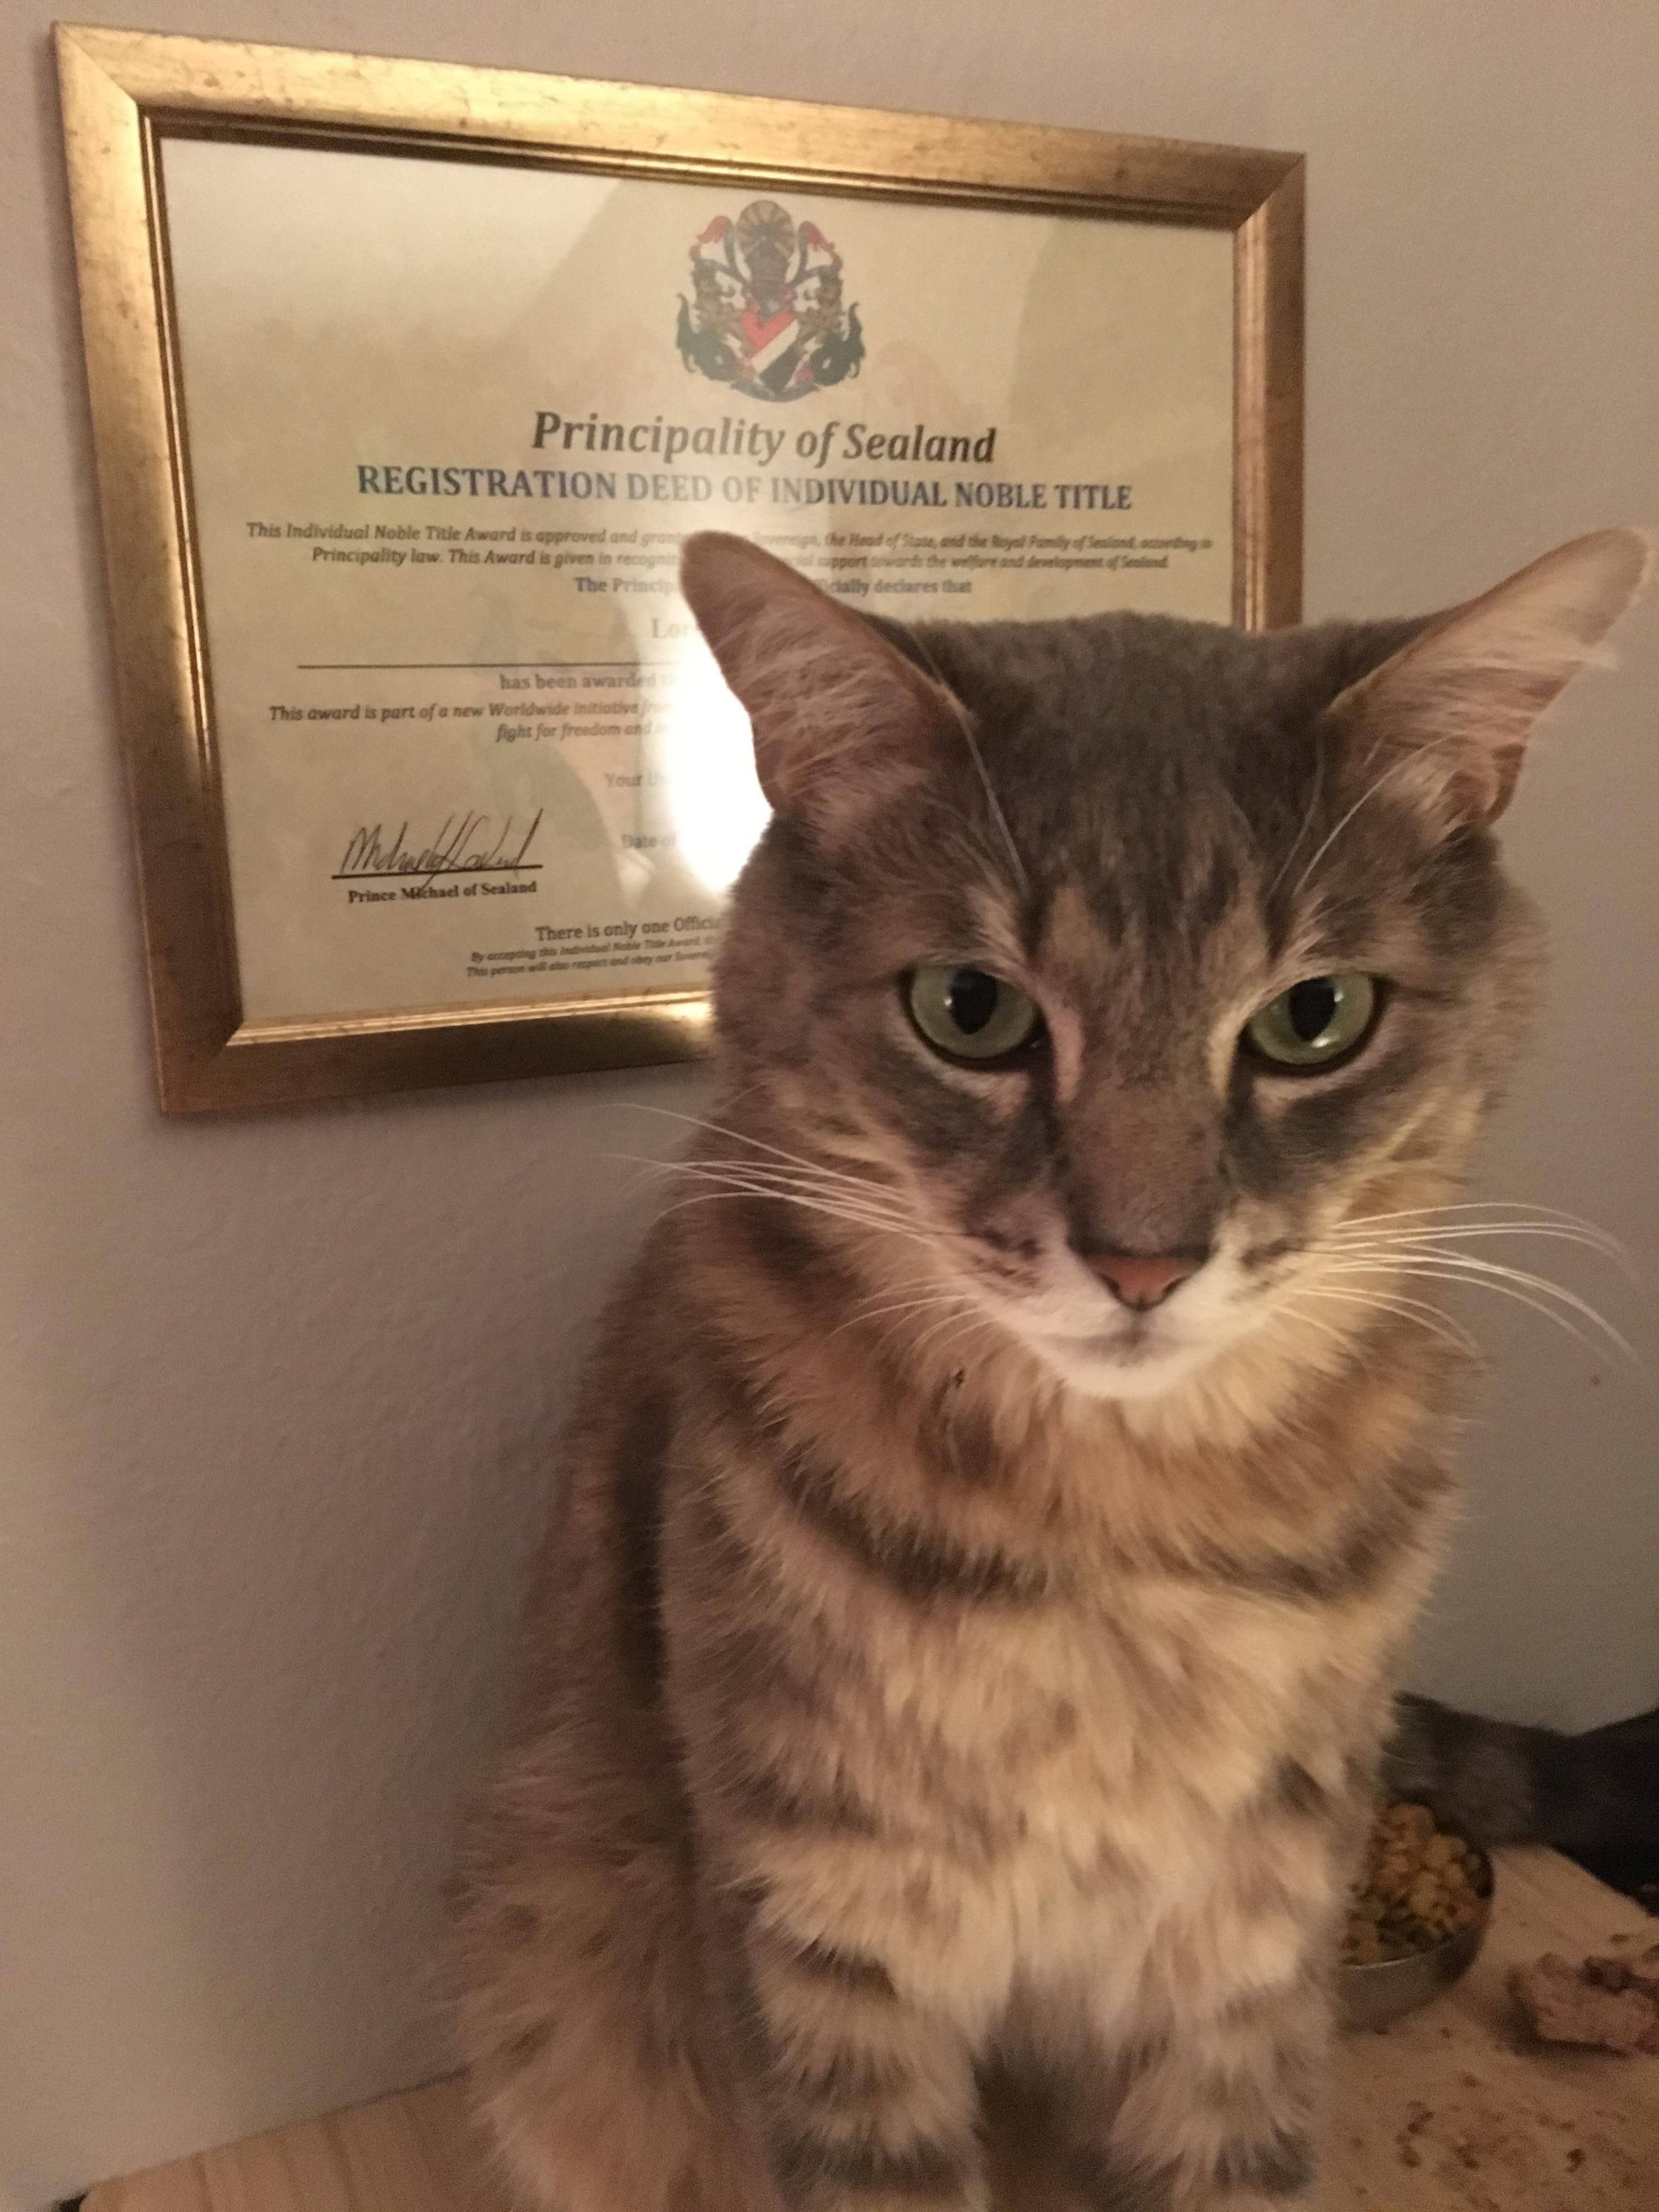 I bought my cat the legal title of a Lord and one square foot of land over which he may rule. His Lordship remains unimpressed.